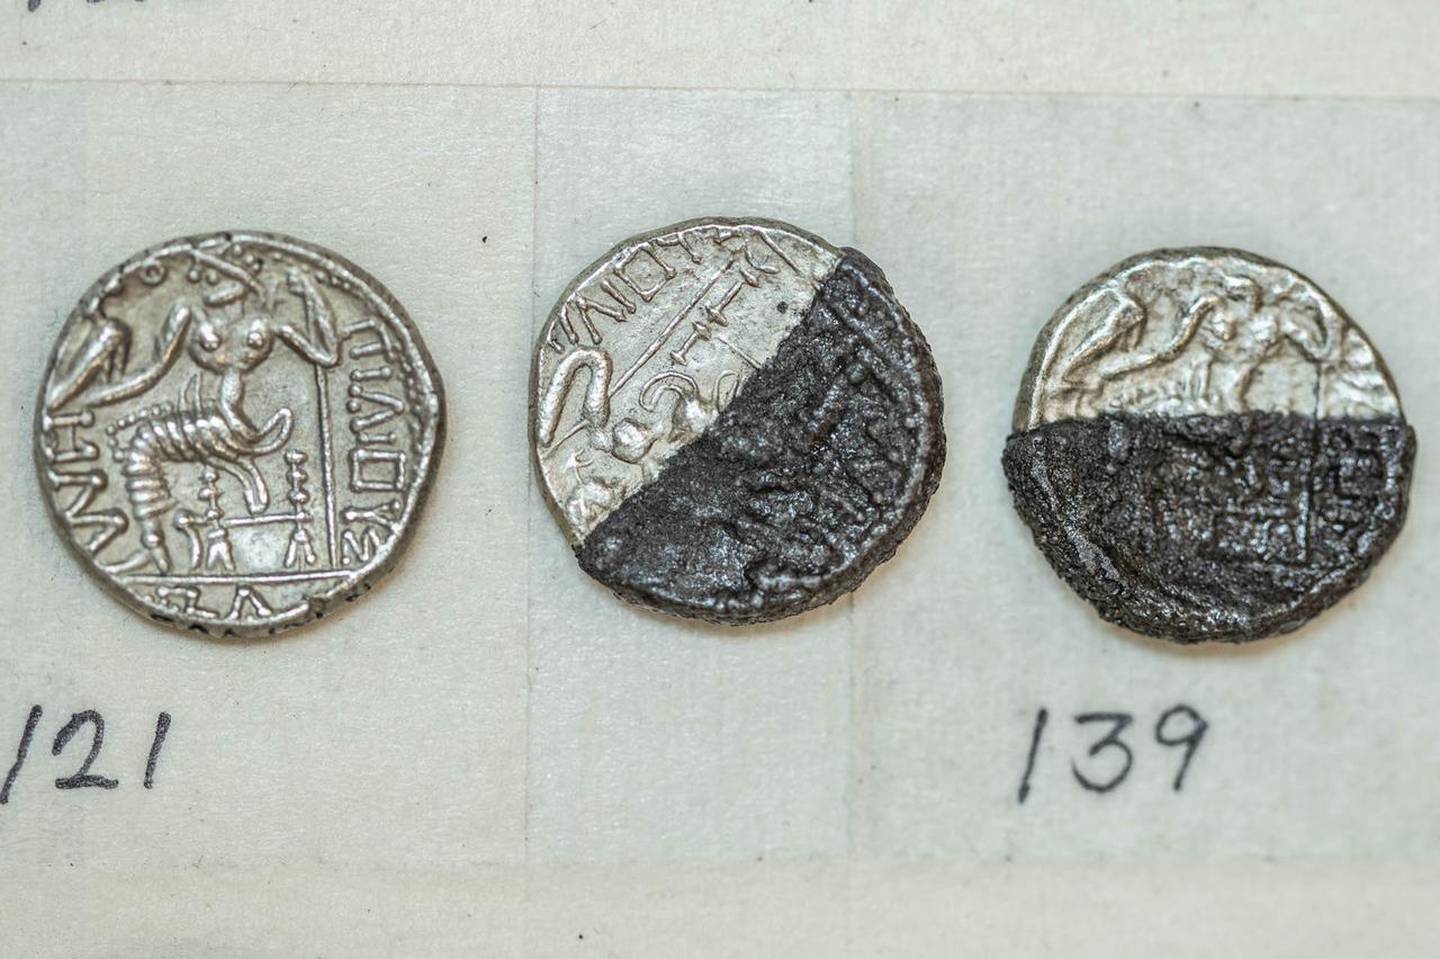 Sharjah Archaeology Authority unearthed the coins in February. Courtesy: Sharjah Archaeology Authority